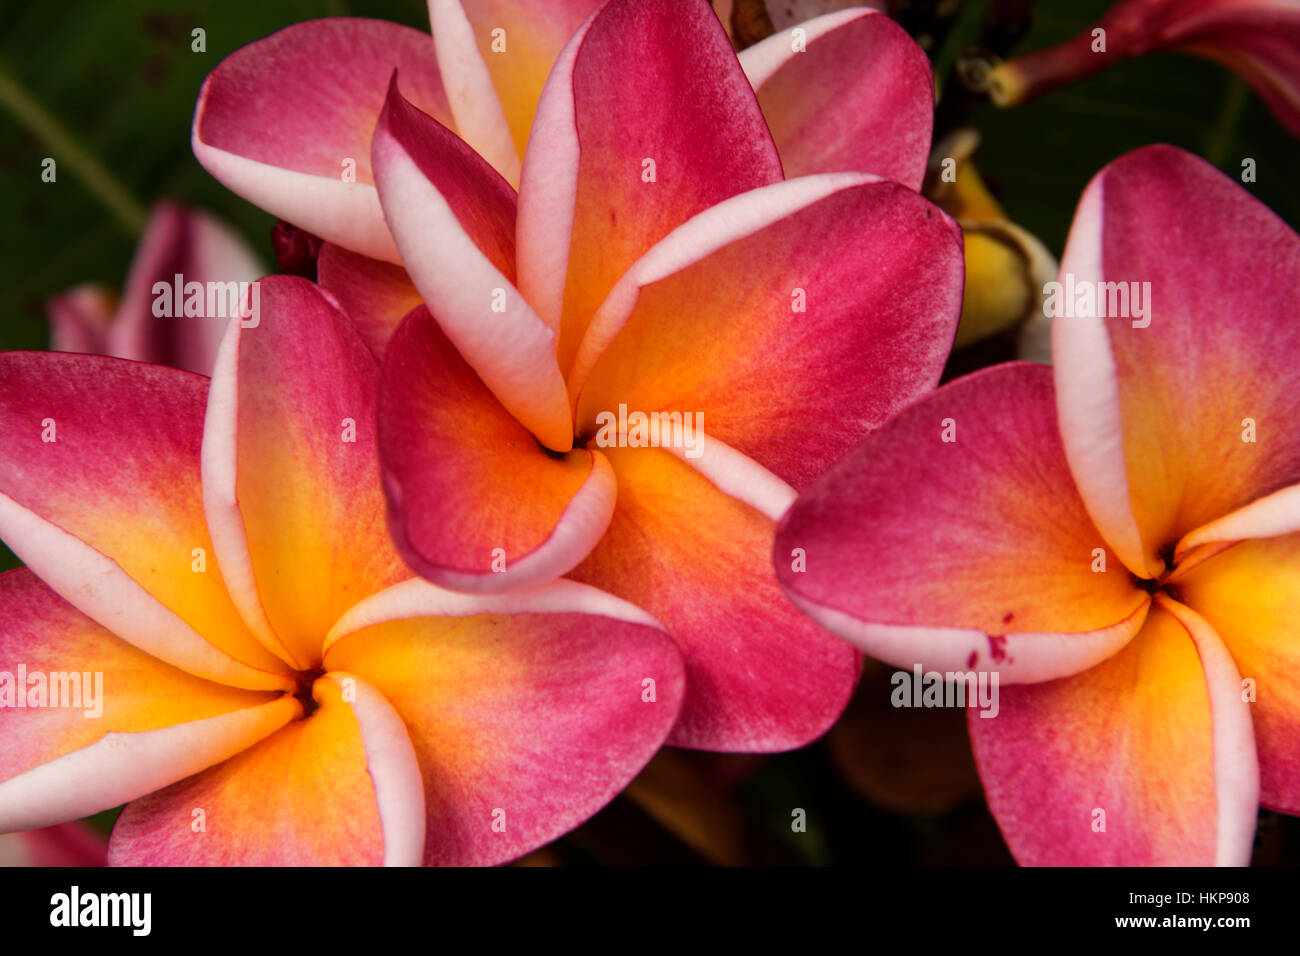 three five petal pink flowers frangipani ( plumeria ) with yellow center on the light green background close up selective focus Stock Photo